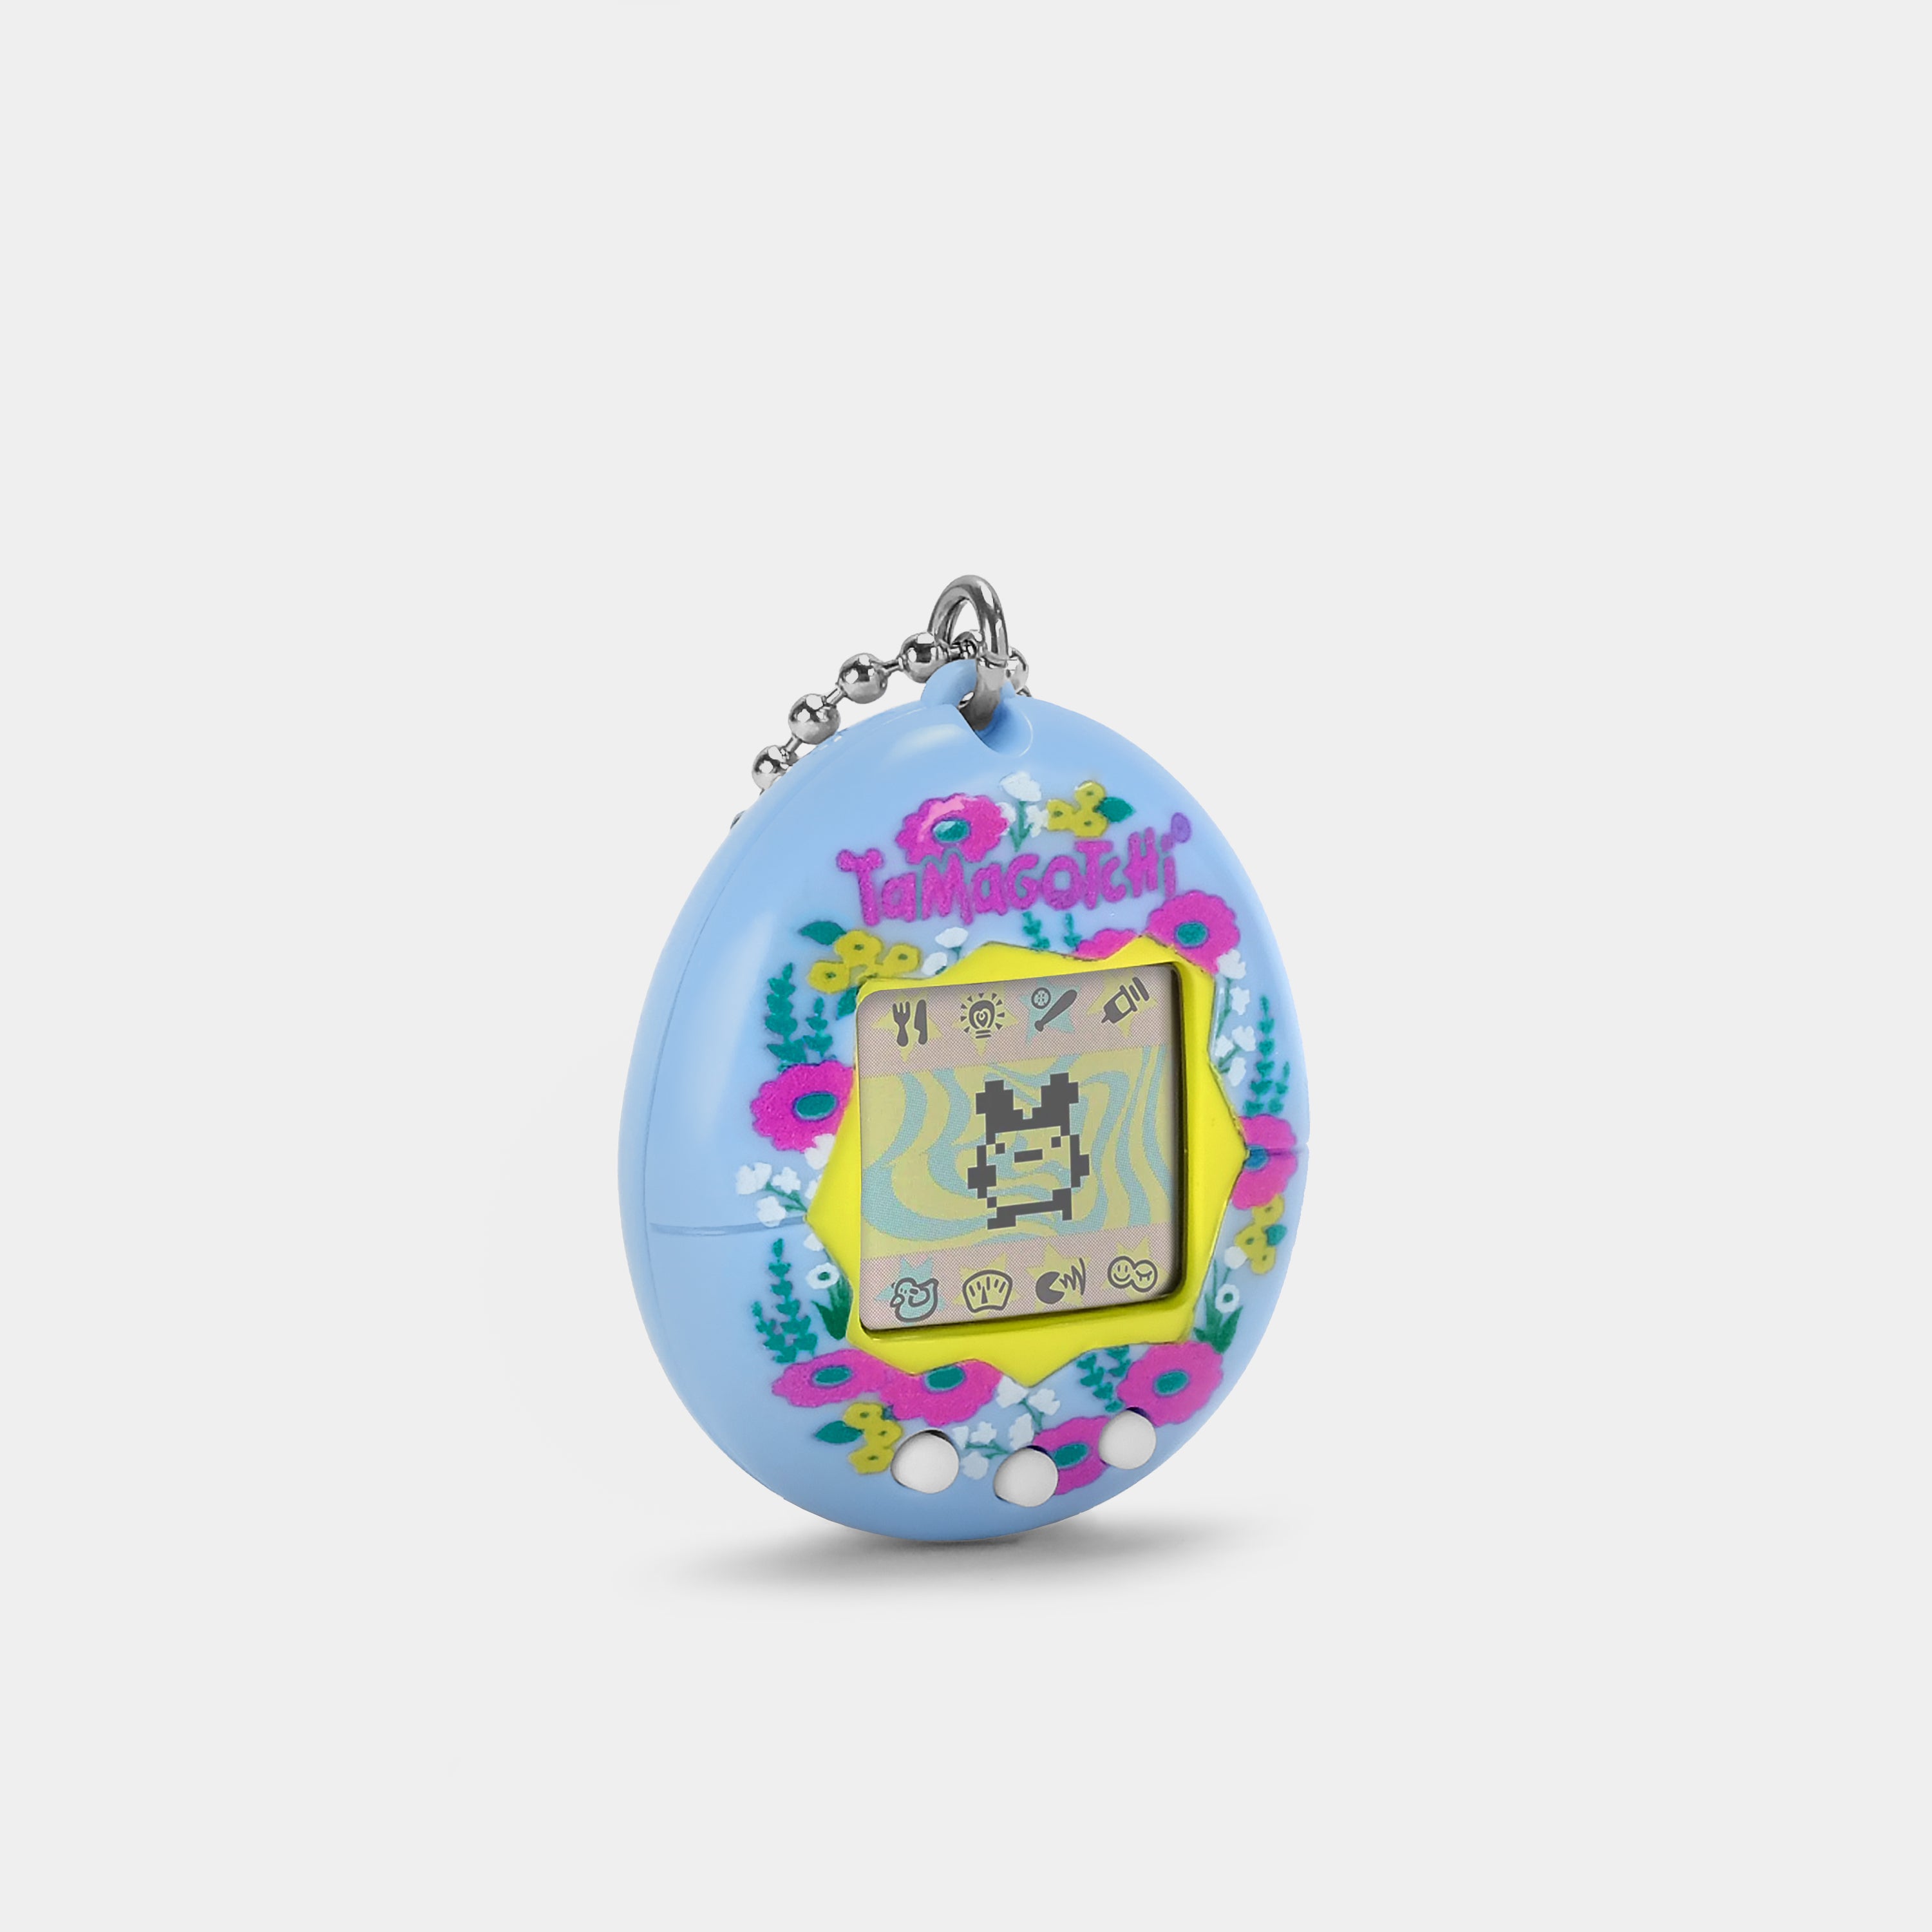 Dive into Magic with Harry Potter Tamagotchi Nano: Care for Your